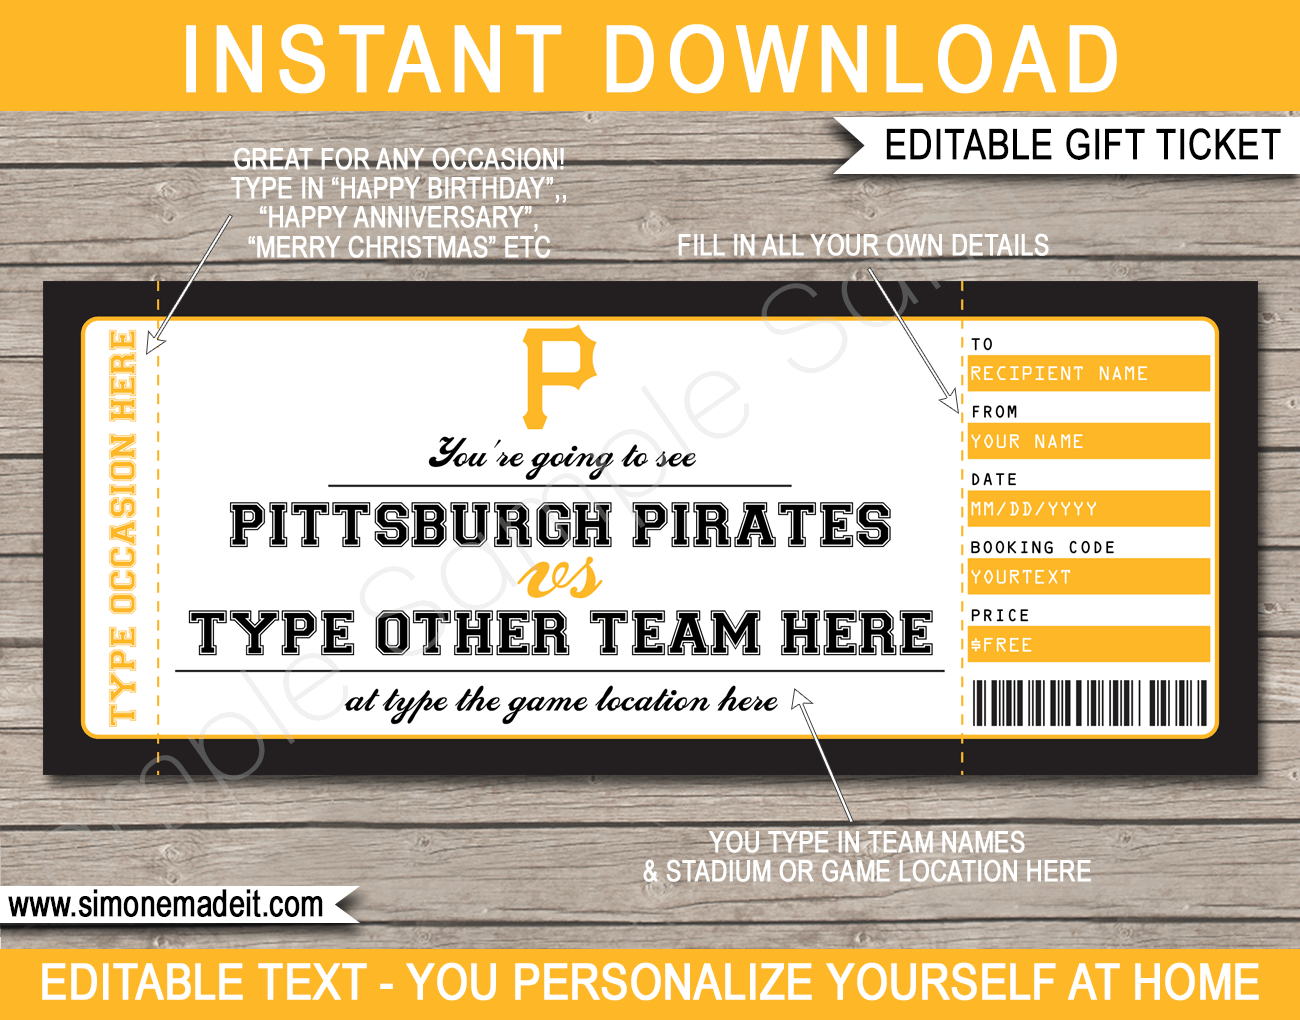 pittsburgh-pirates-game-ticket-gift-voucher-printable-surprise